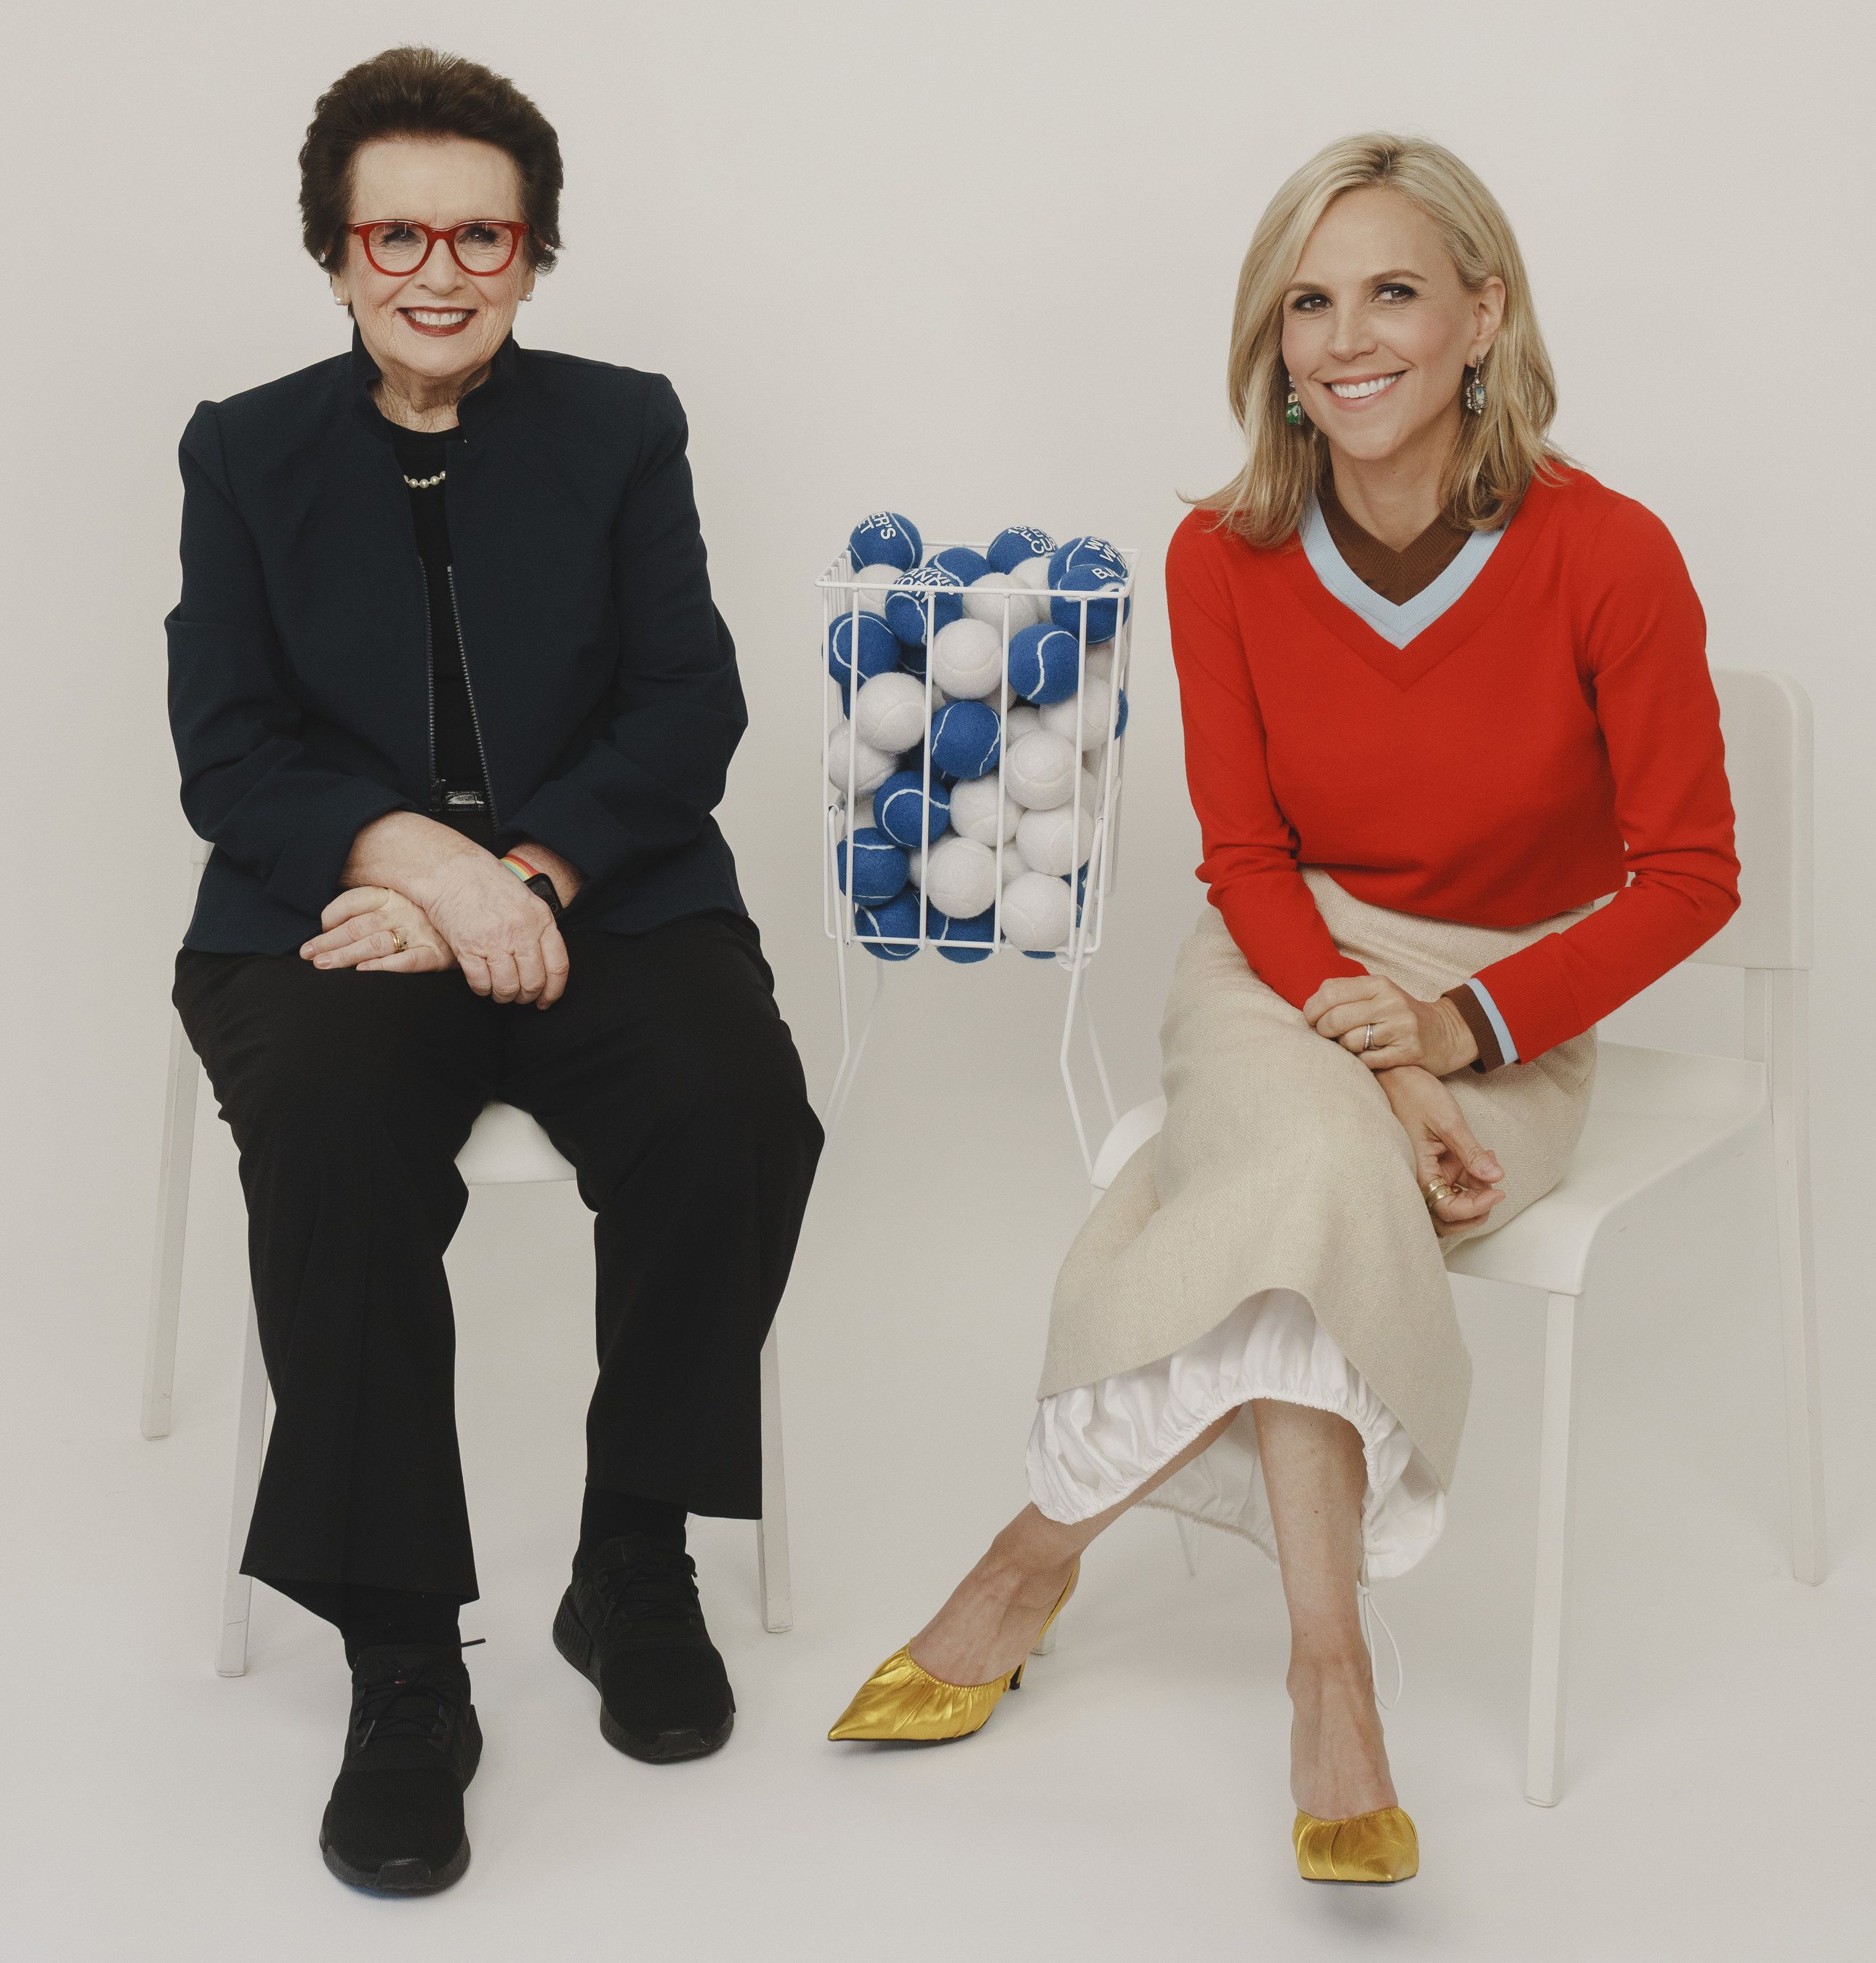 Tory Burch Collaborated with Tennis Legend Billie Jean King